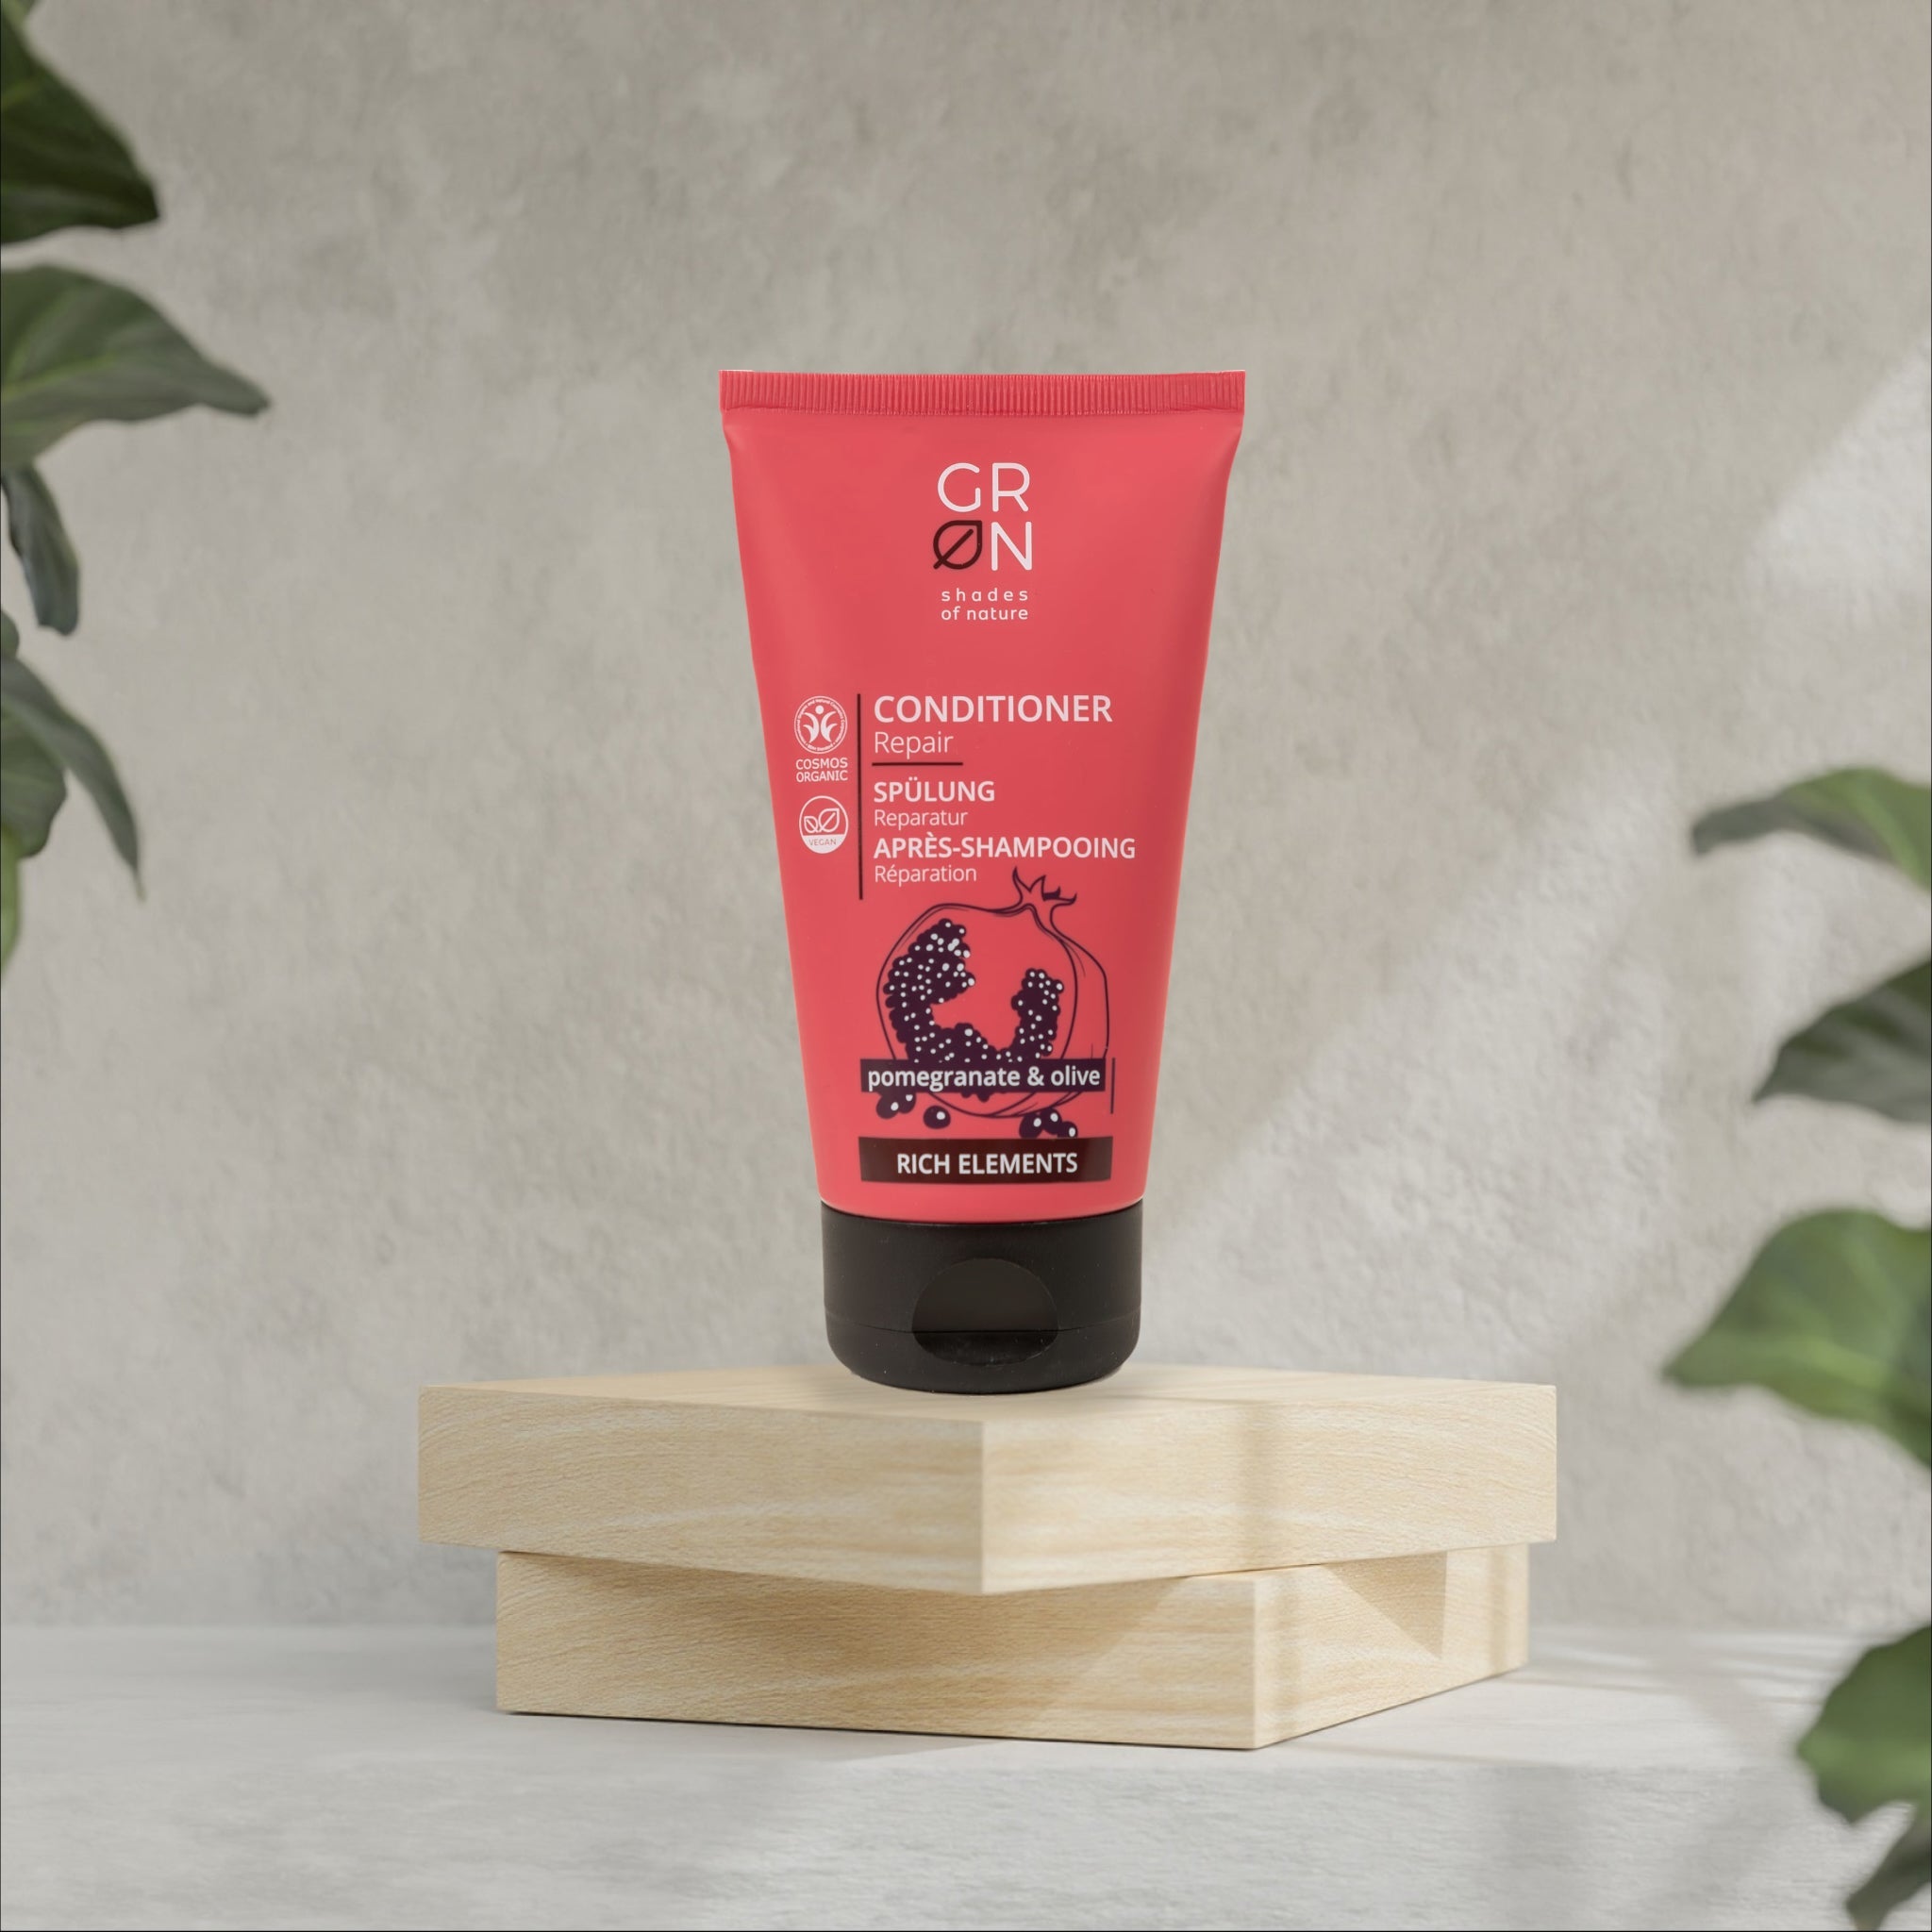 Repair Conditioner with Olive & Pomegranate - mypure.co.uk